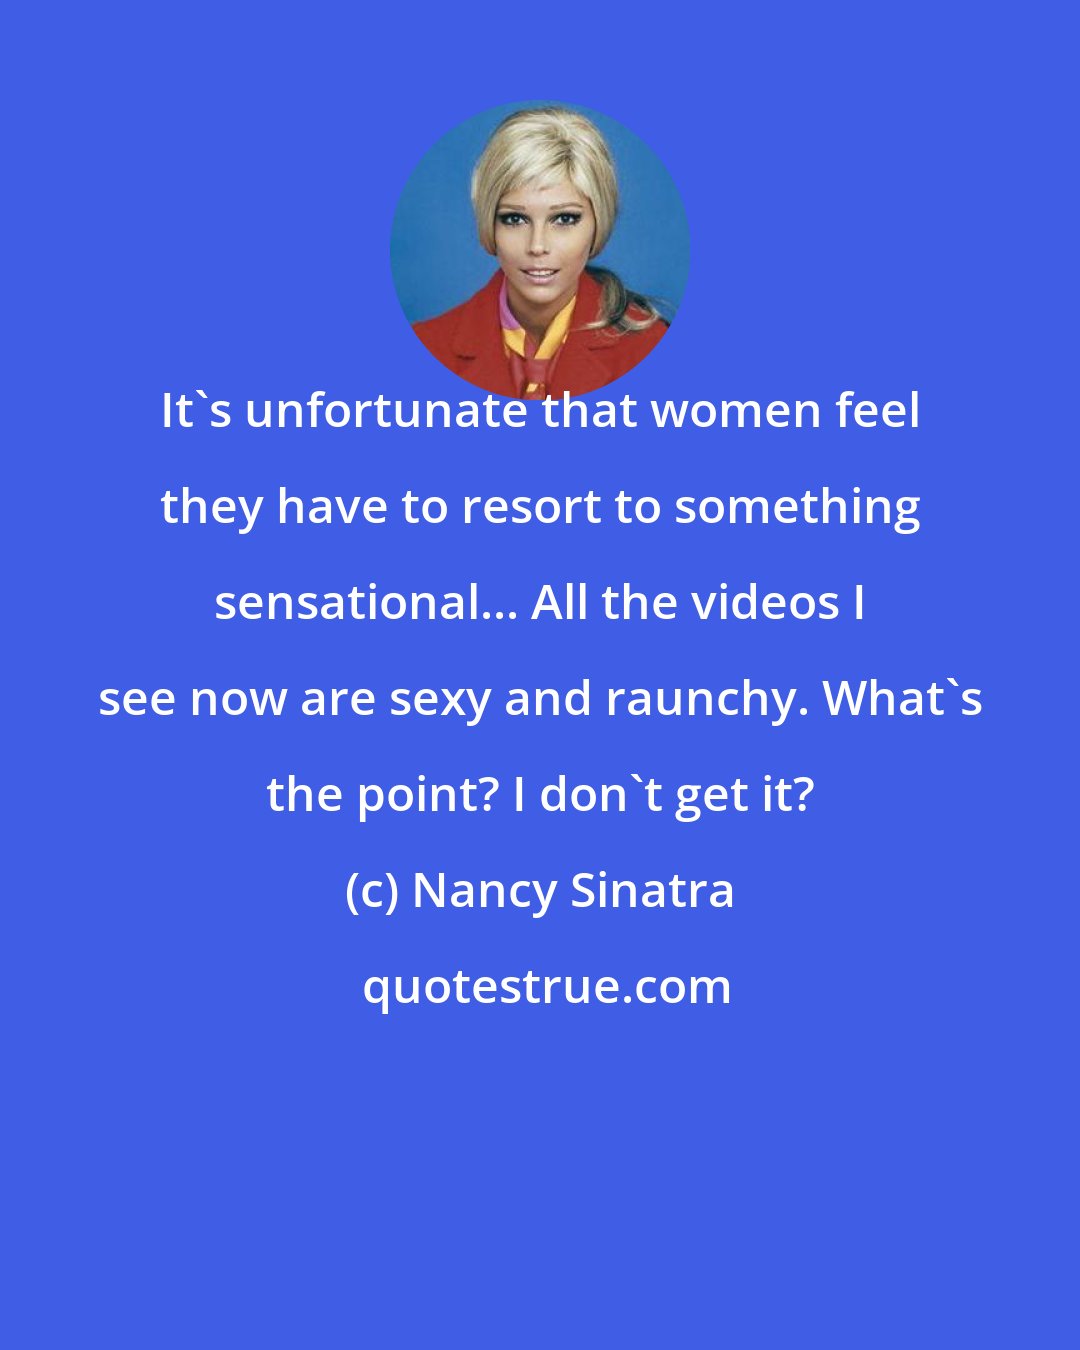 Nancy Sinatra: It's unfortunate that women feel they have to resort to something sensational... All the videos I see now are sexy and raunchy. What's the point? I don't get it?